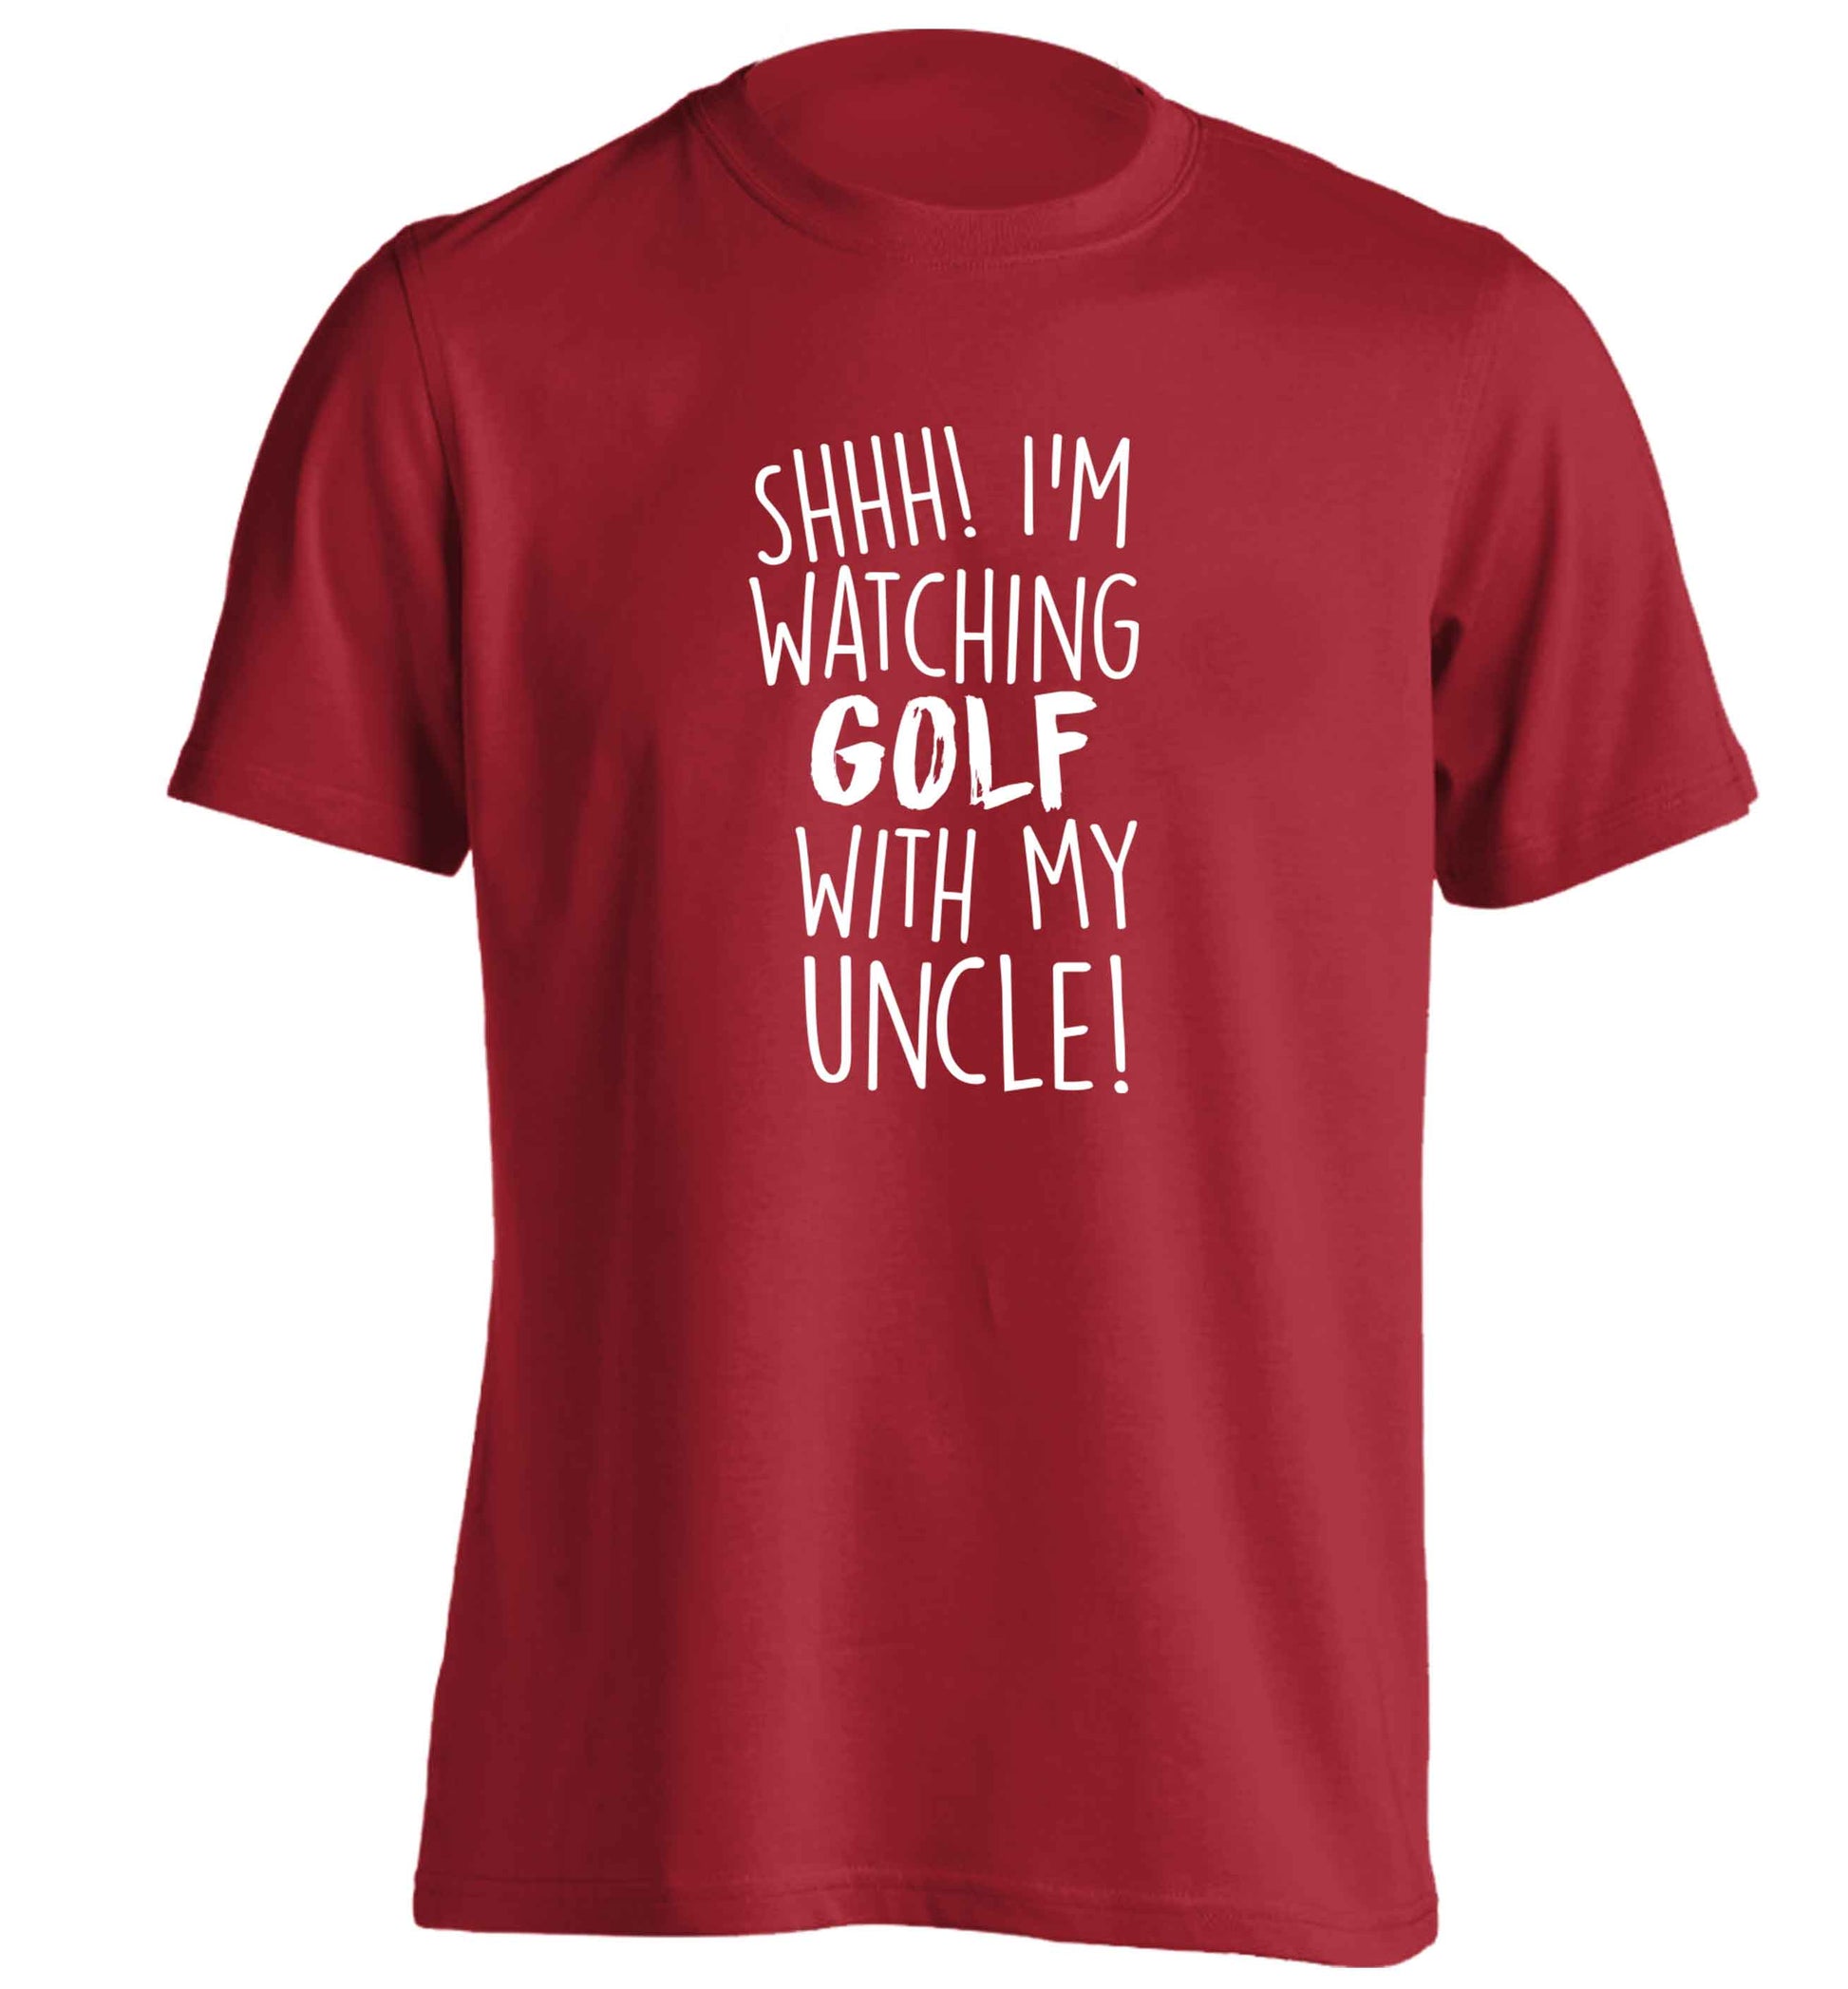 Shh I'm watching golf with my uncle adults unisex red Tshirt 2XL